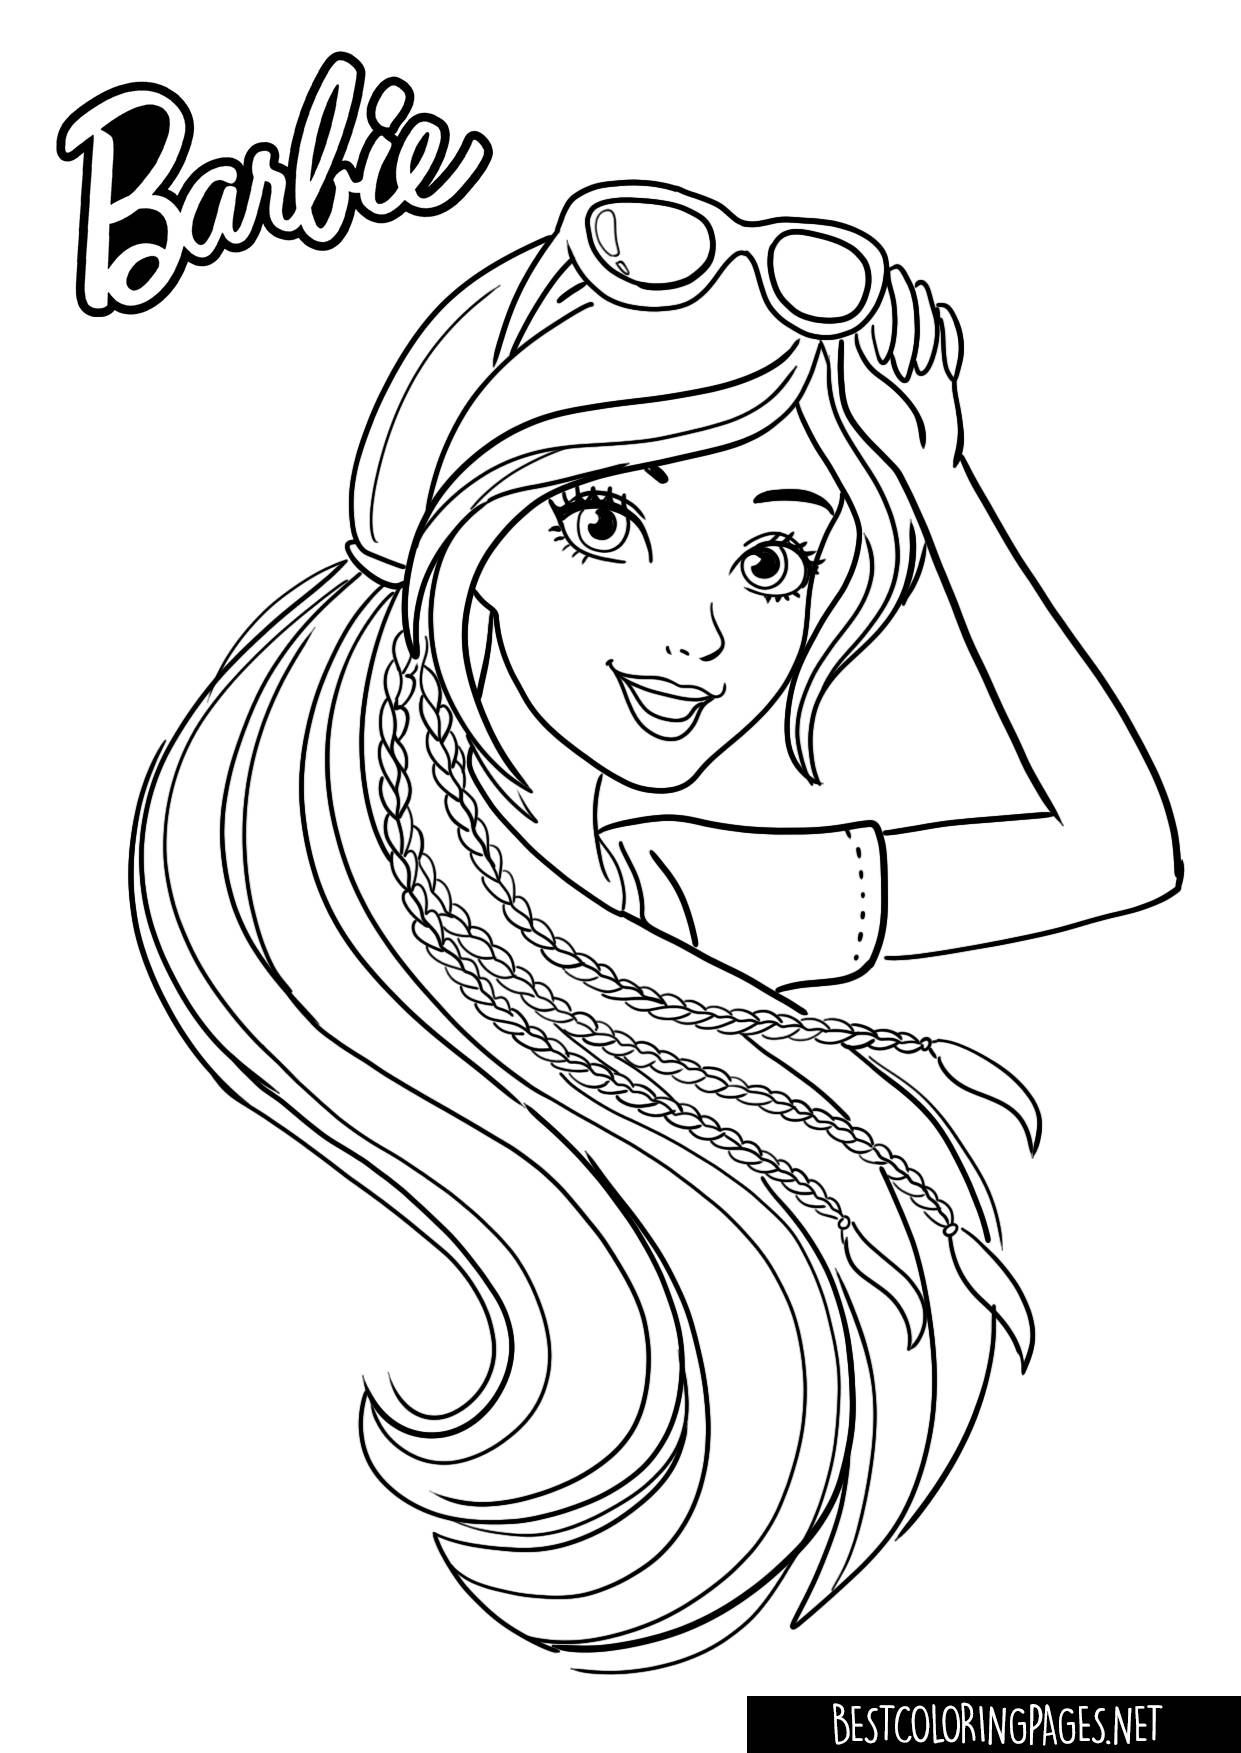 Barbie colouring page - Free printable coloring pages